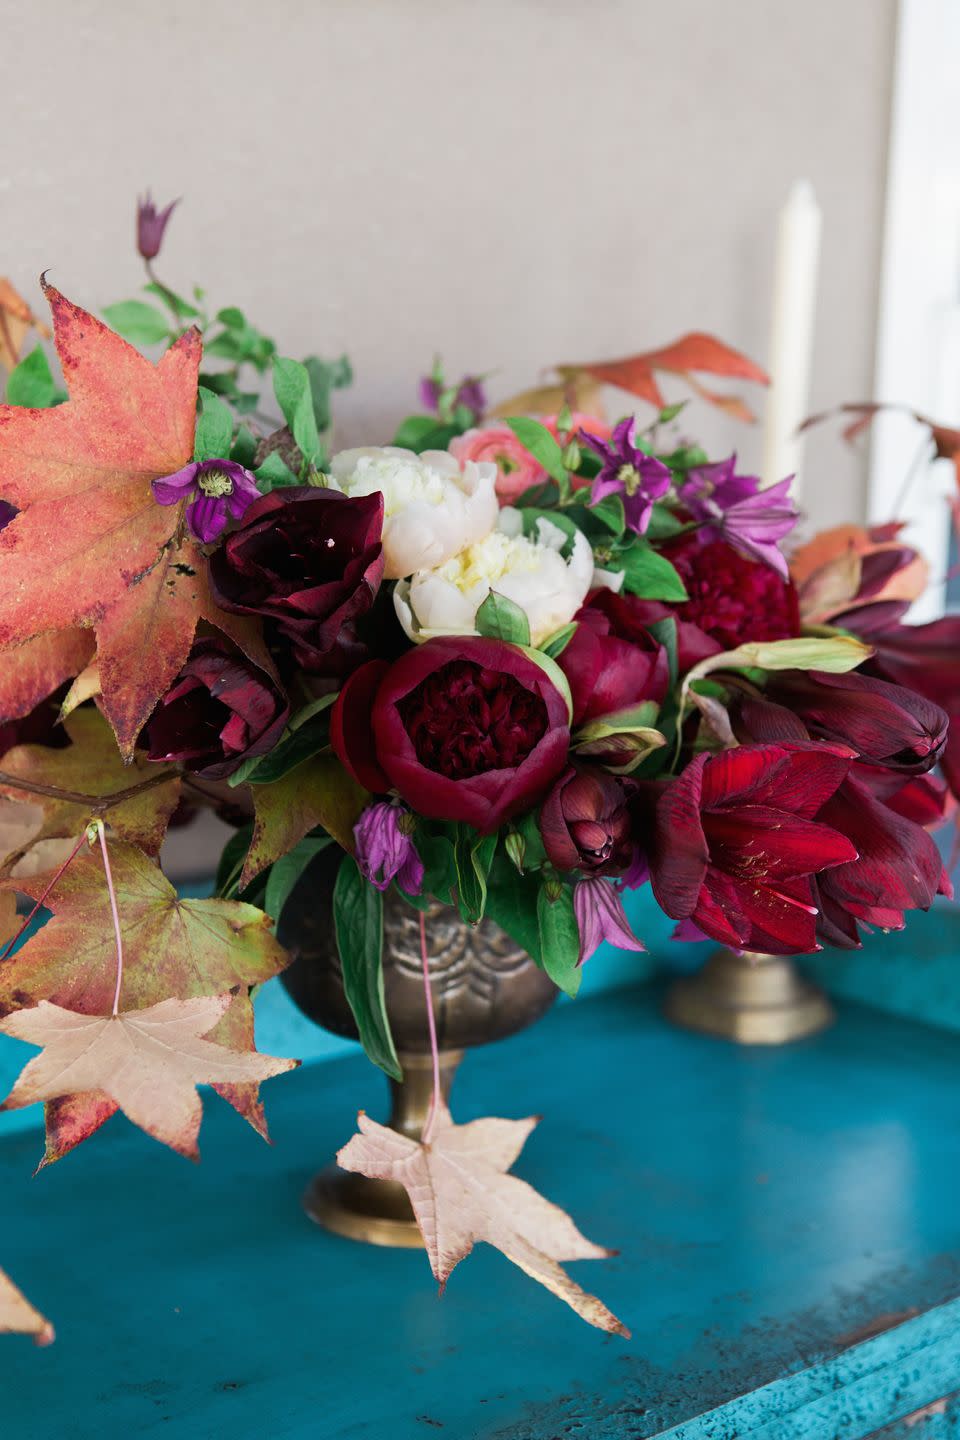 53) Foilage And Burgundy Flowers